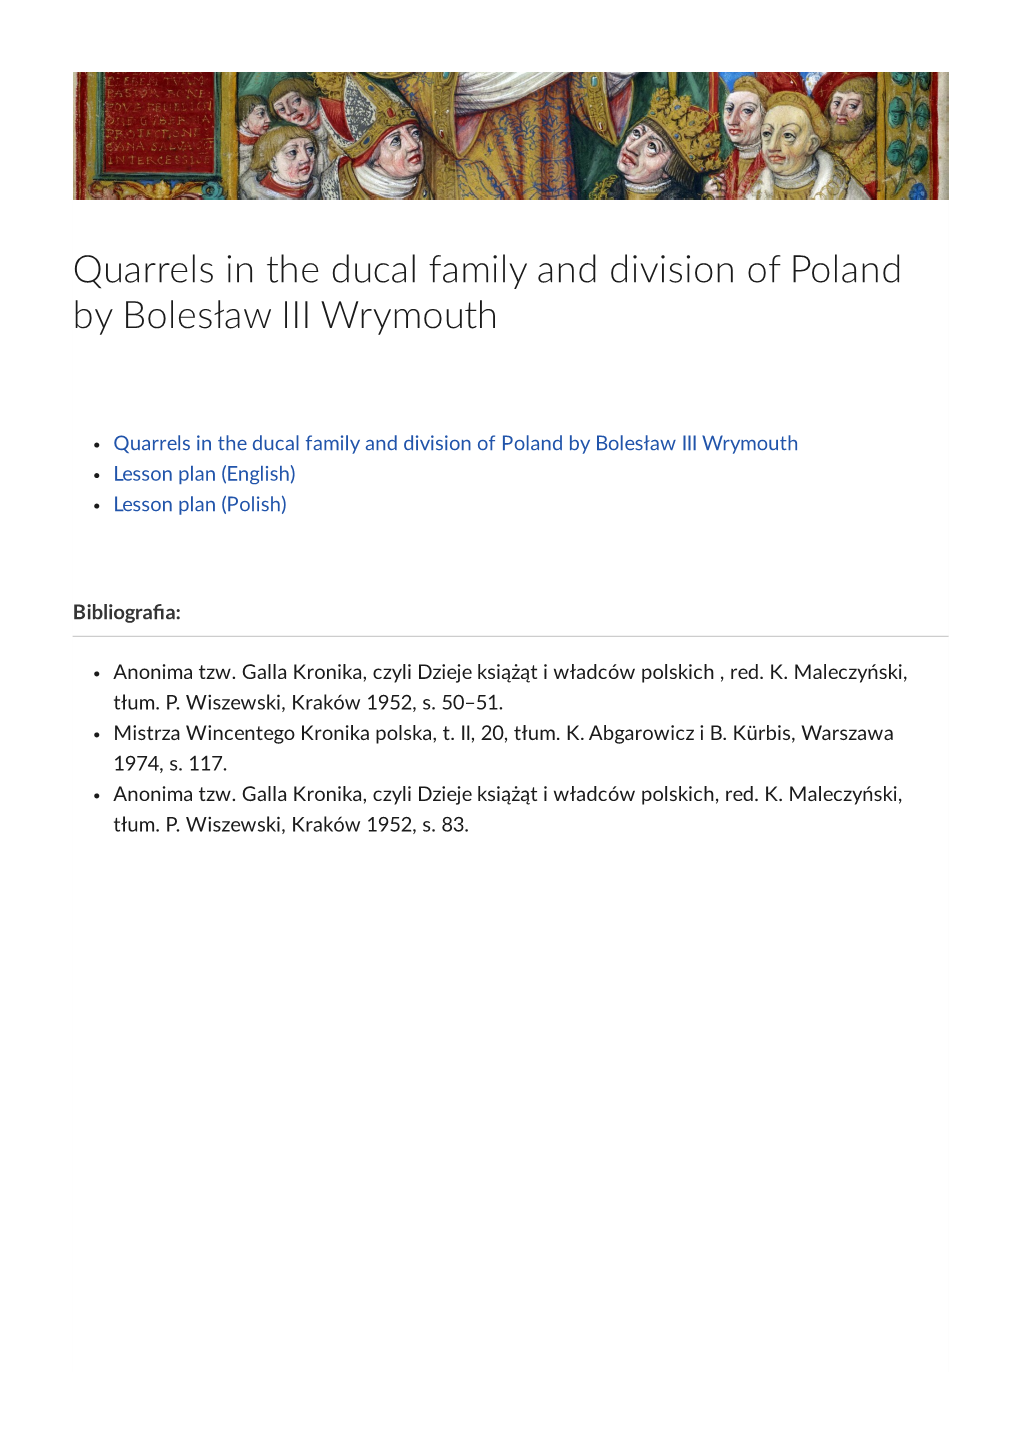 Quarrels in the Ducal Family and Division of Poland by Bolesław III Wrymouth